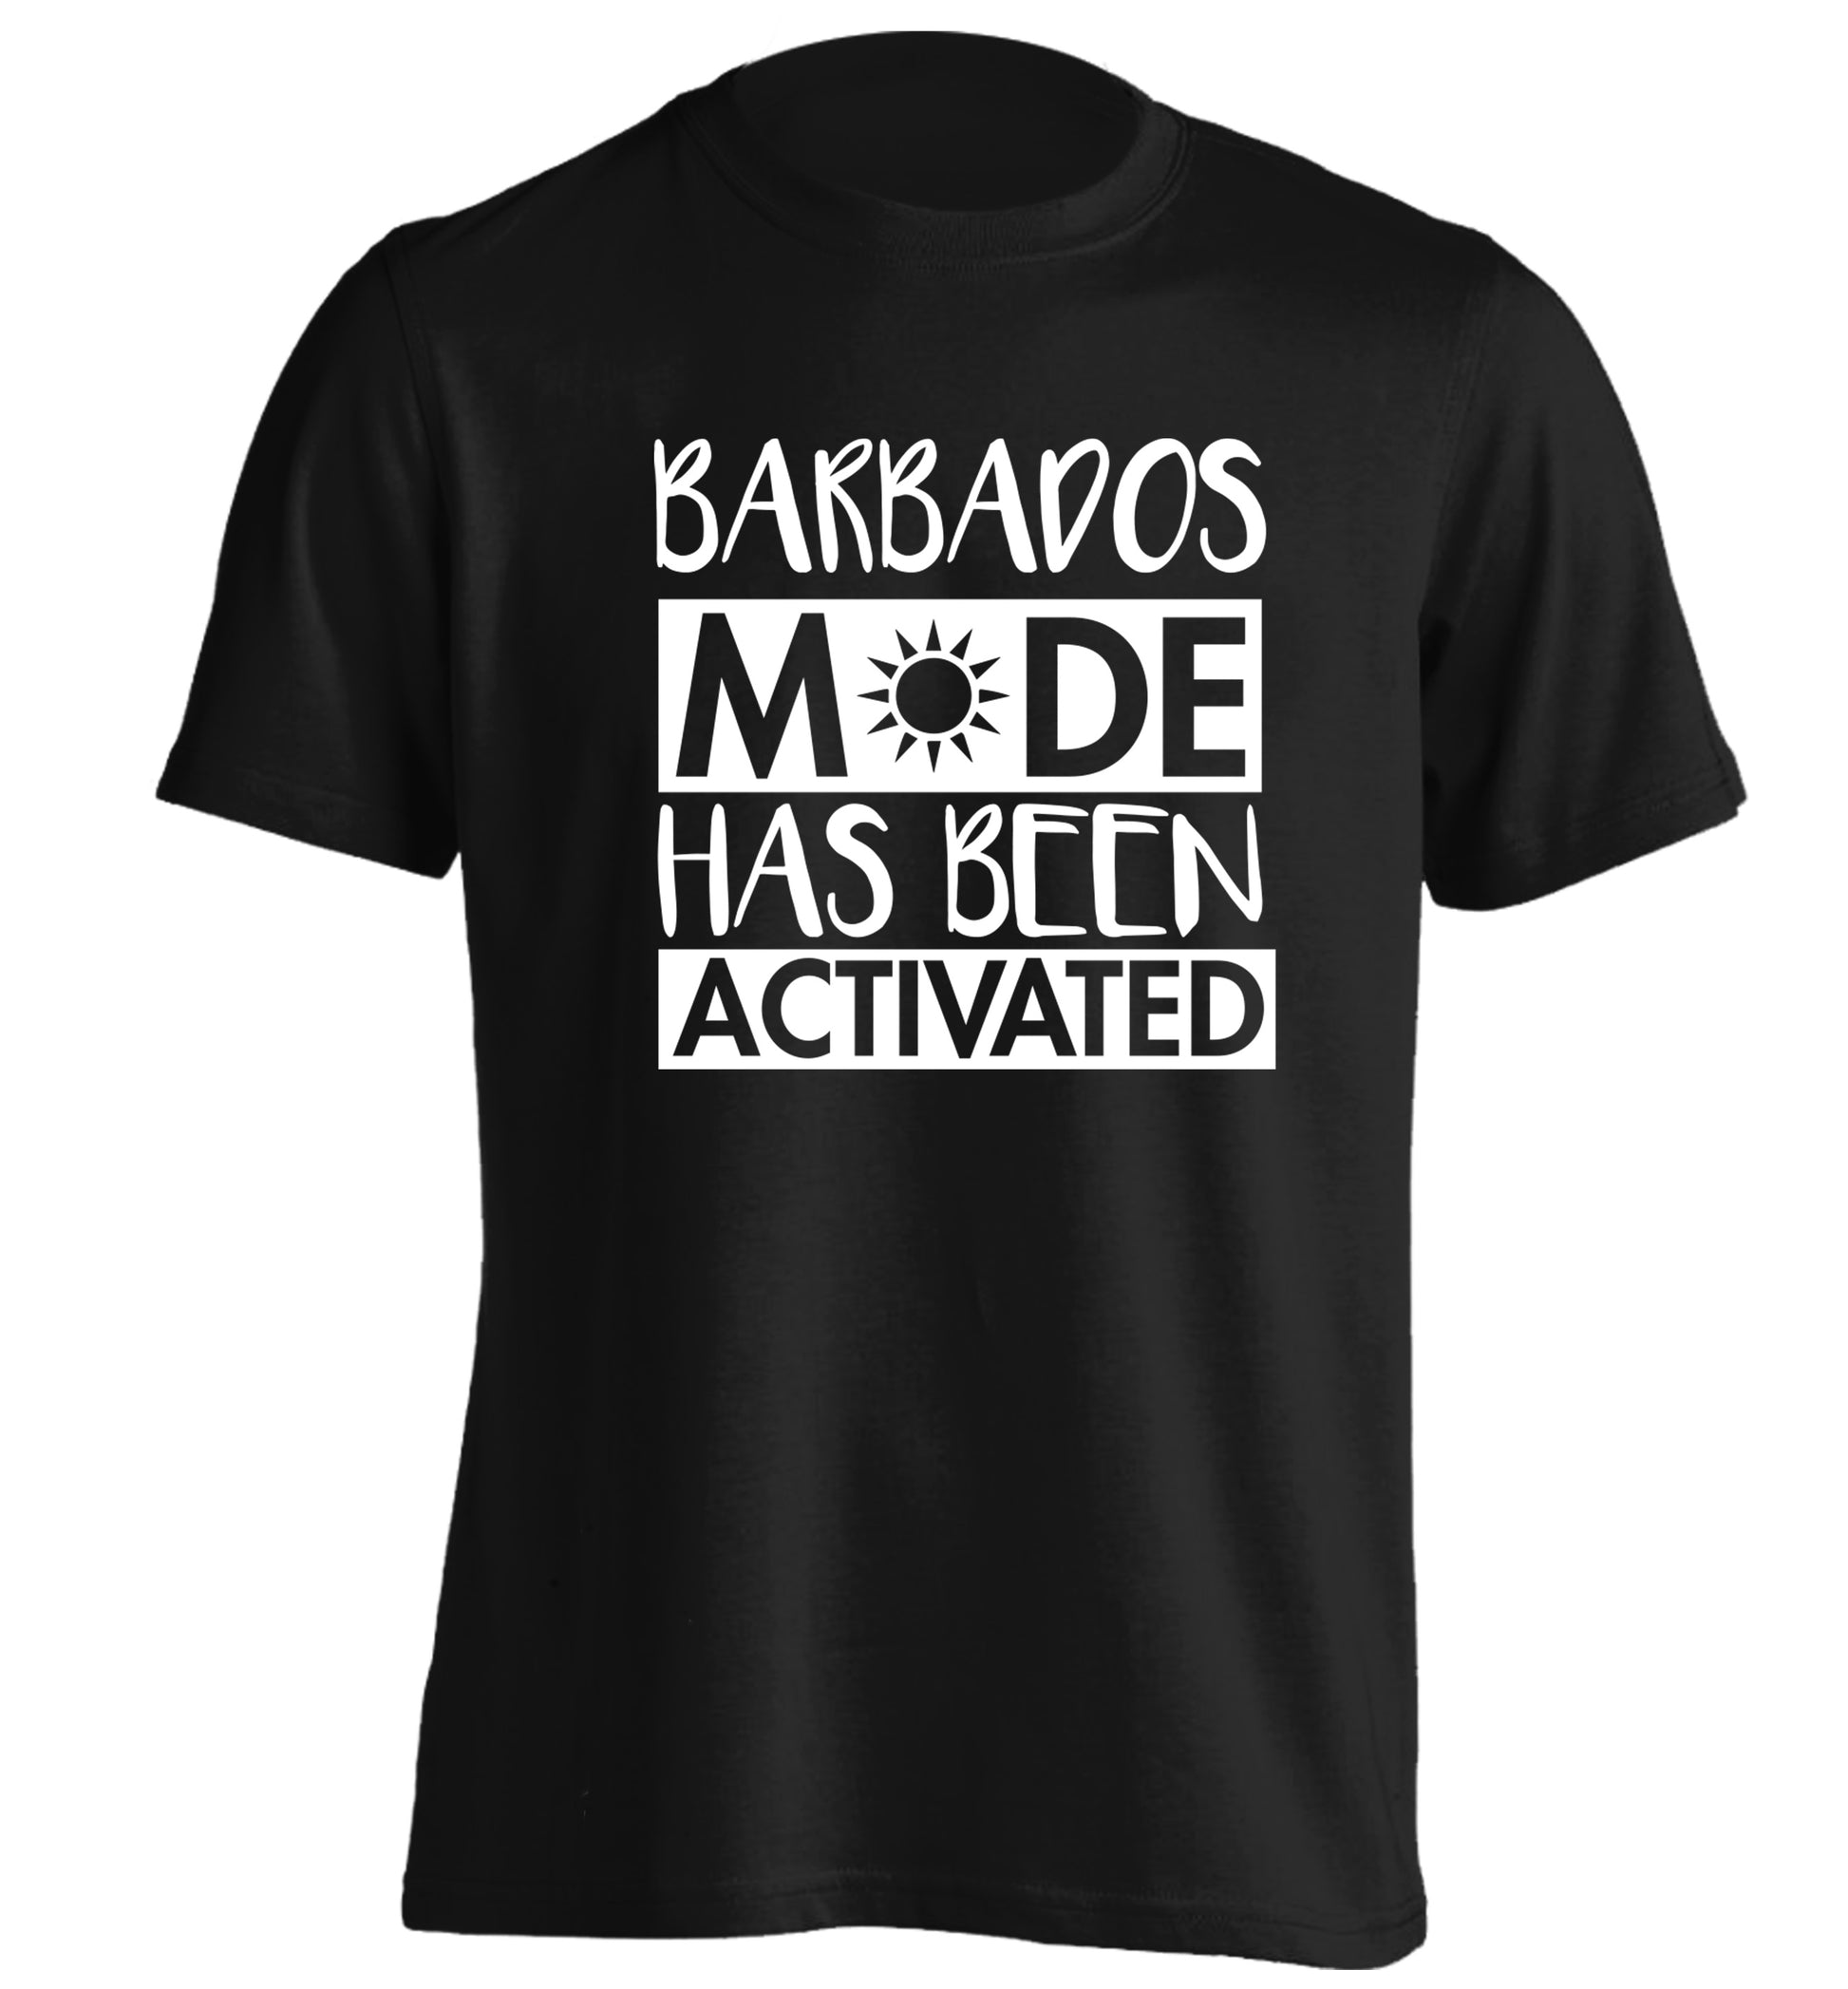 Barbados mode has been activated adults unisex black Tshirt 2XL